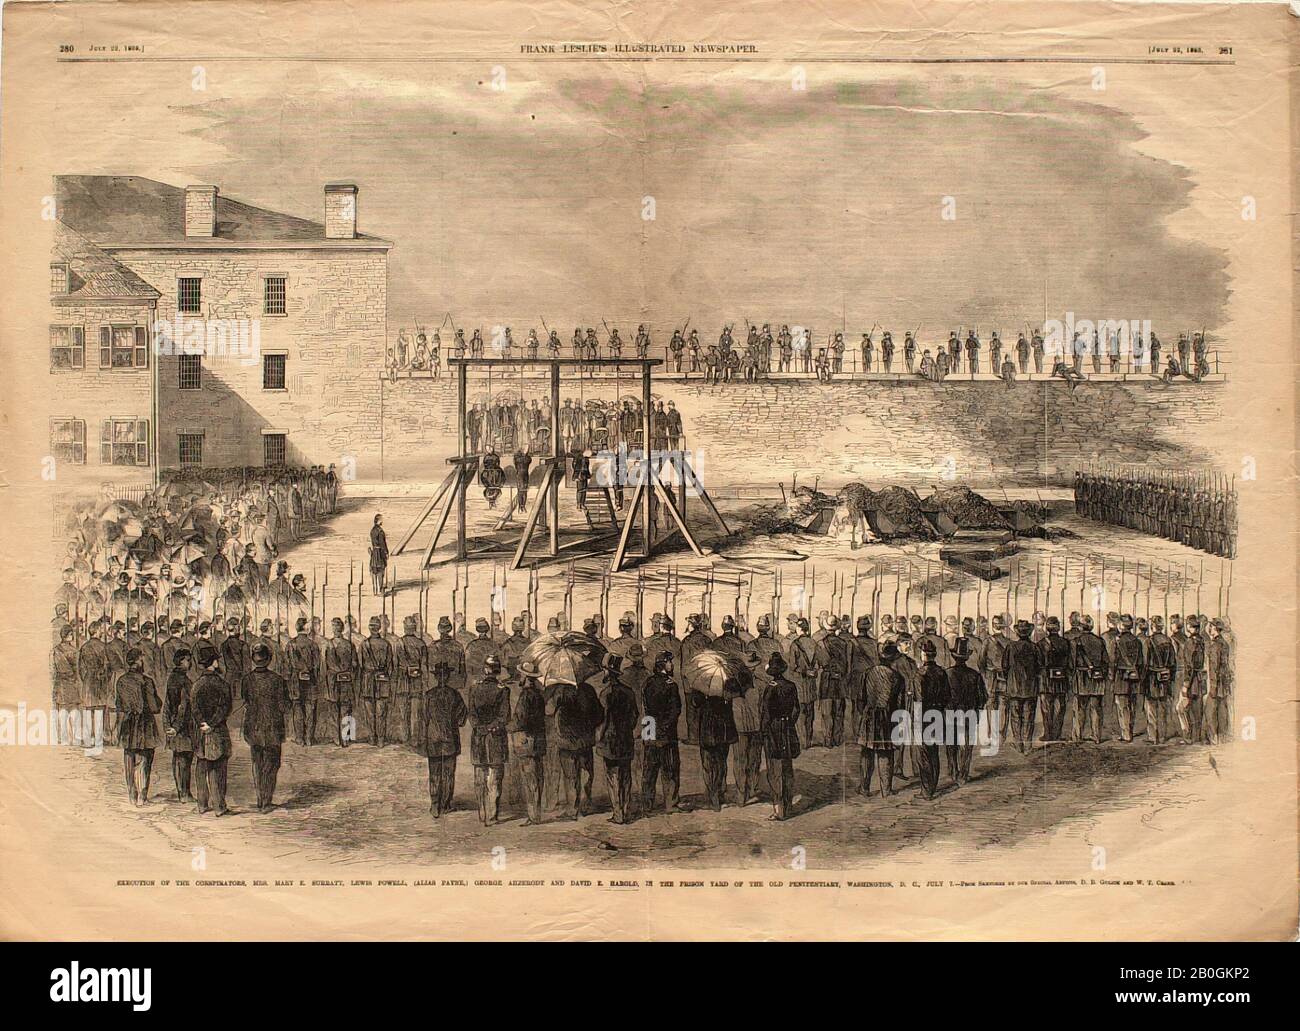 David B. Gulick, American, born 1829, W. T. Crane, (American, 19th century), The Hanging of the Conspirators in the Prison Yard of the Old Penitentiary, July 7, From Harper's Weekly, 1865, Wood engraving on paper, image: 13 3/4 x 20 5/8 in. (34.9 x 52.4 cm Stock Photo